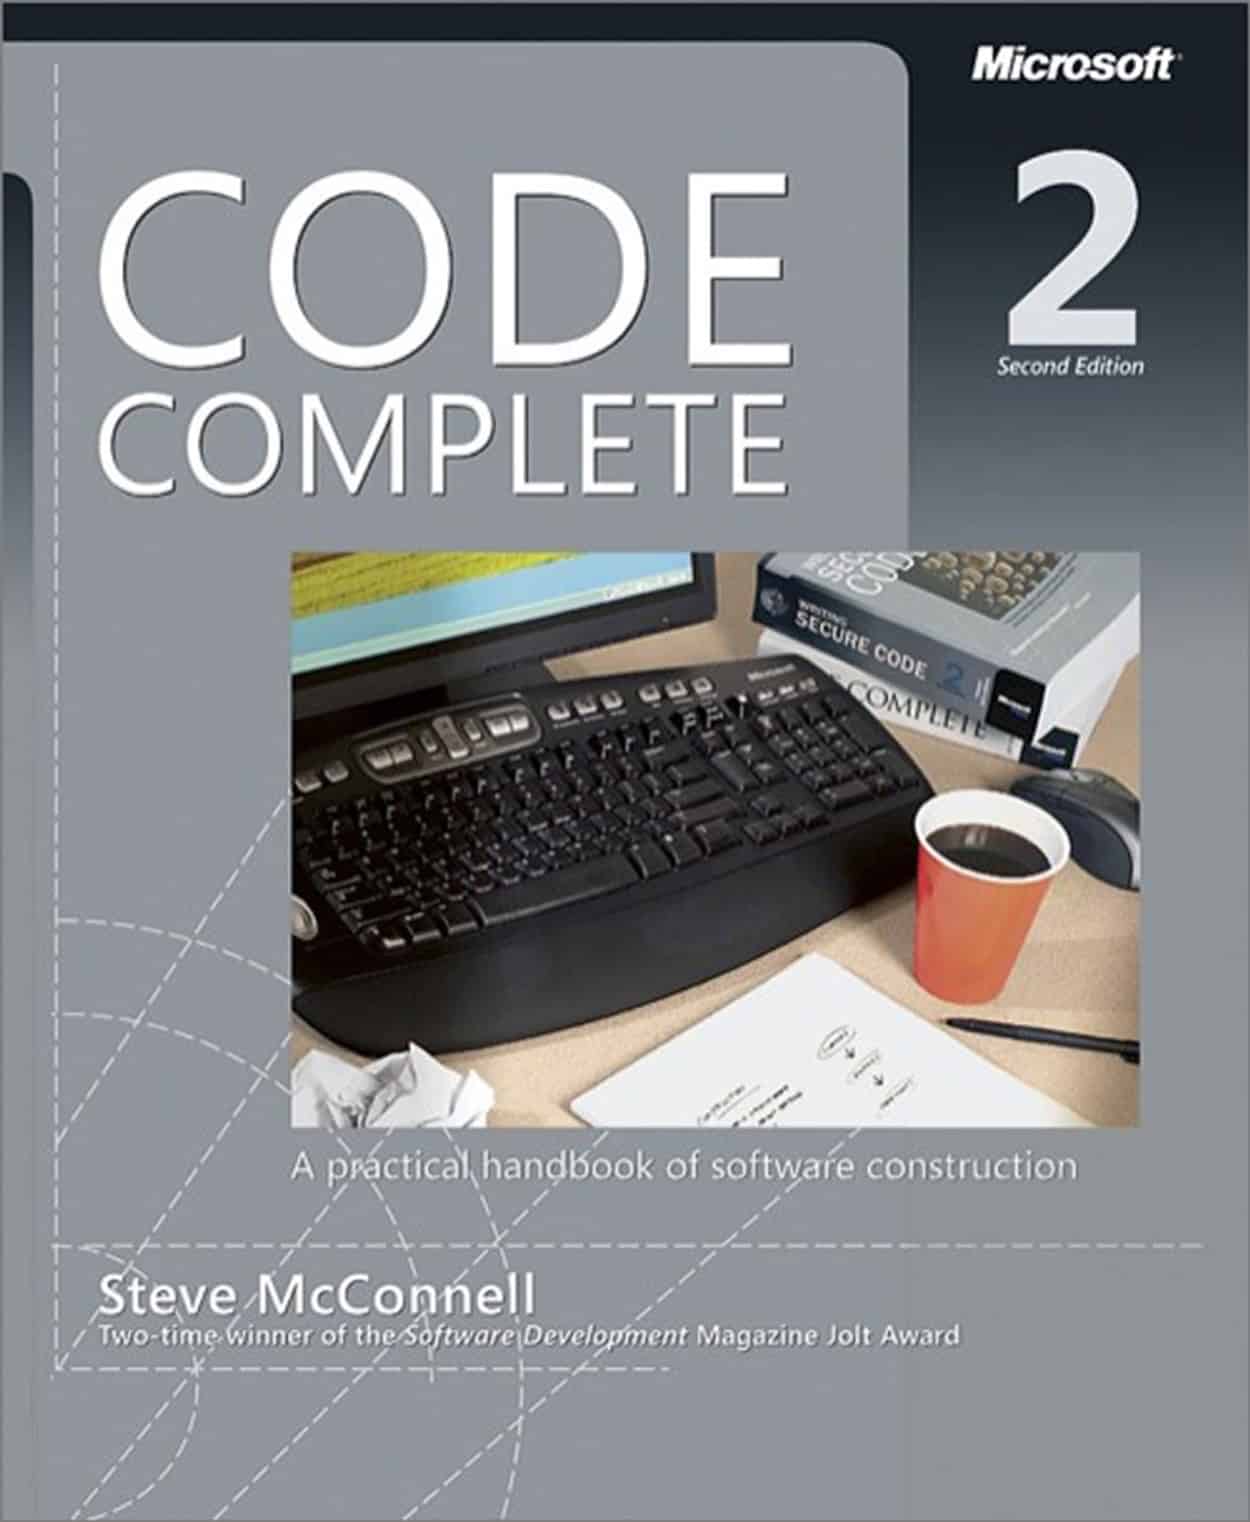 The book cover of "Code Complete: A Practical Handbook of Software Construction"